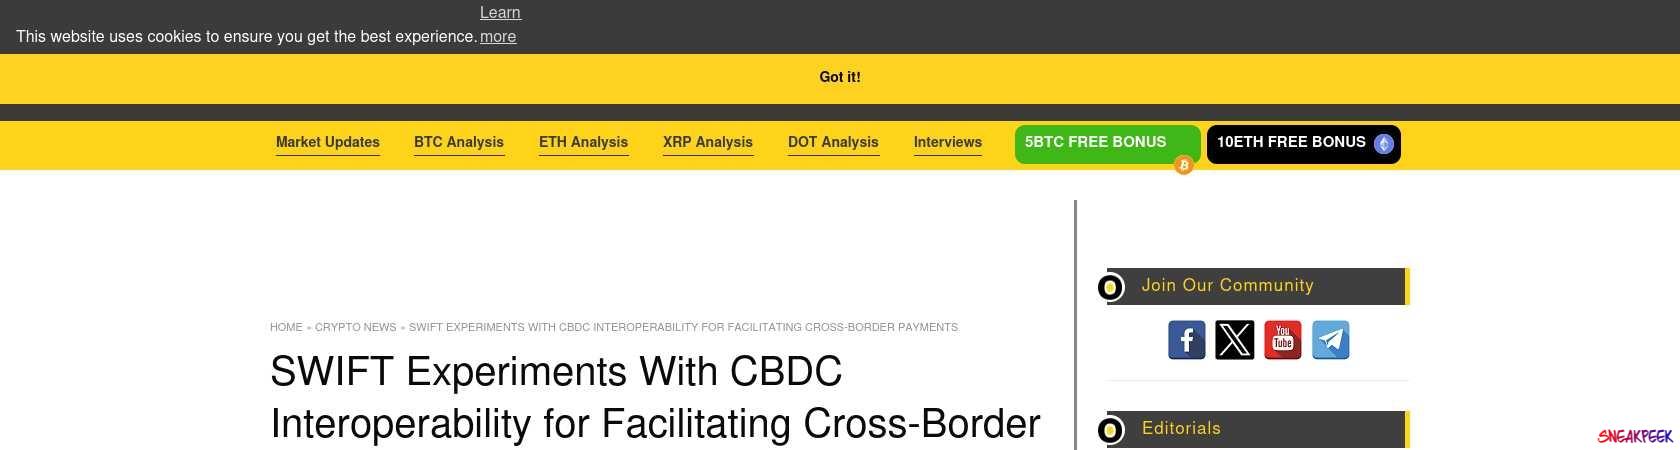 Read the full Article:  ⭲ SWIFT Experiments With CBDC Interoperability for Facilitating Cross-Border Payments